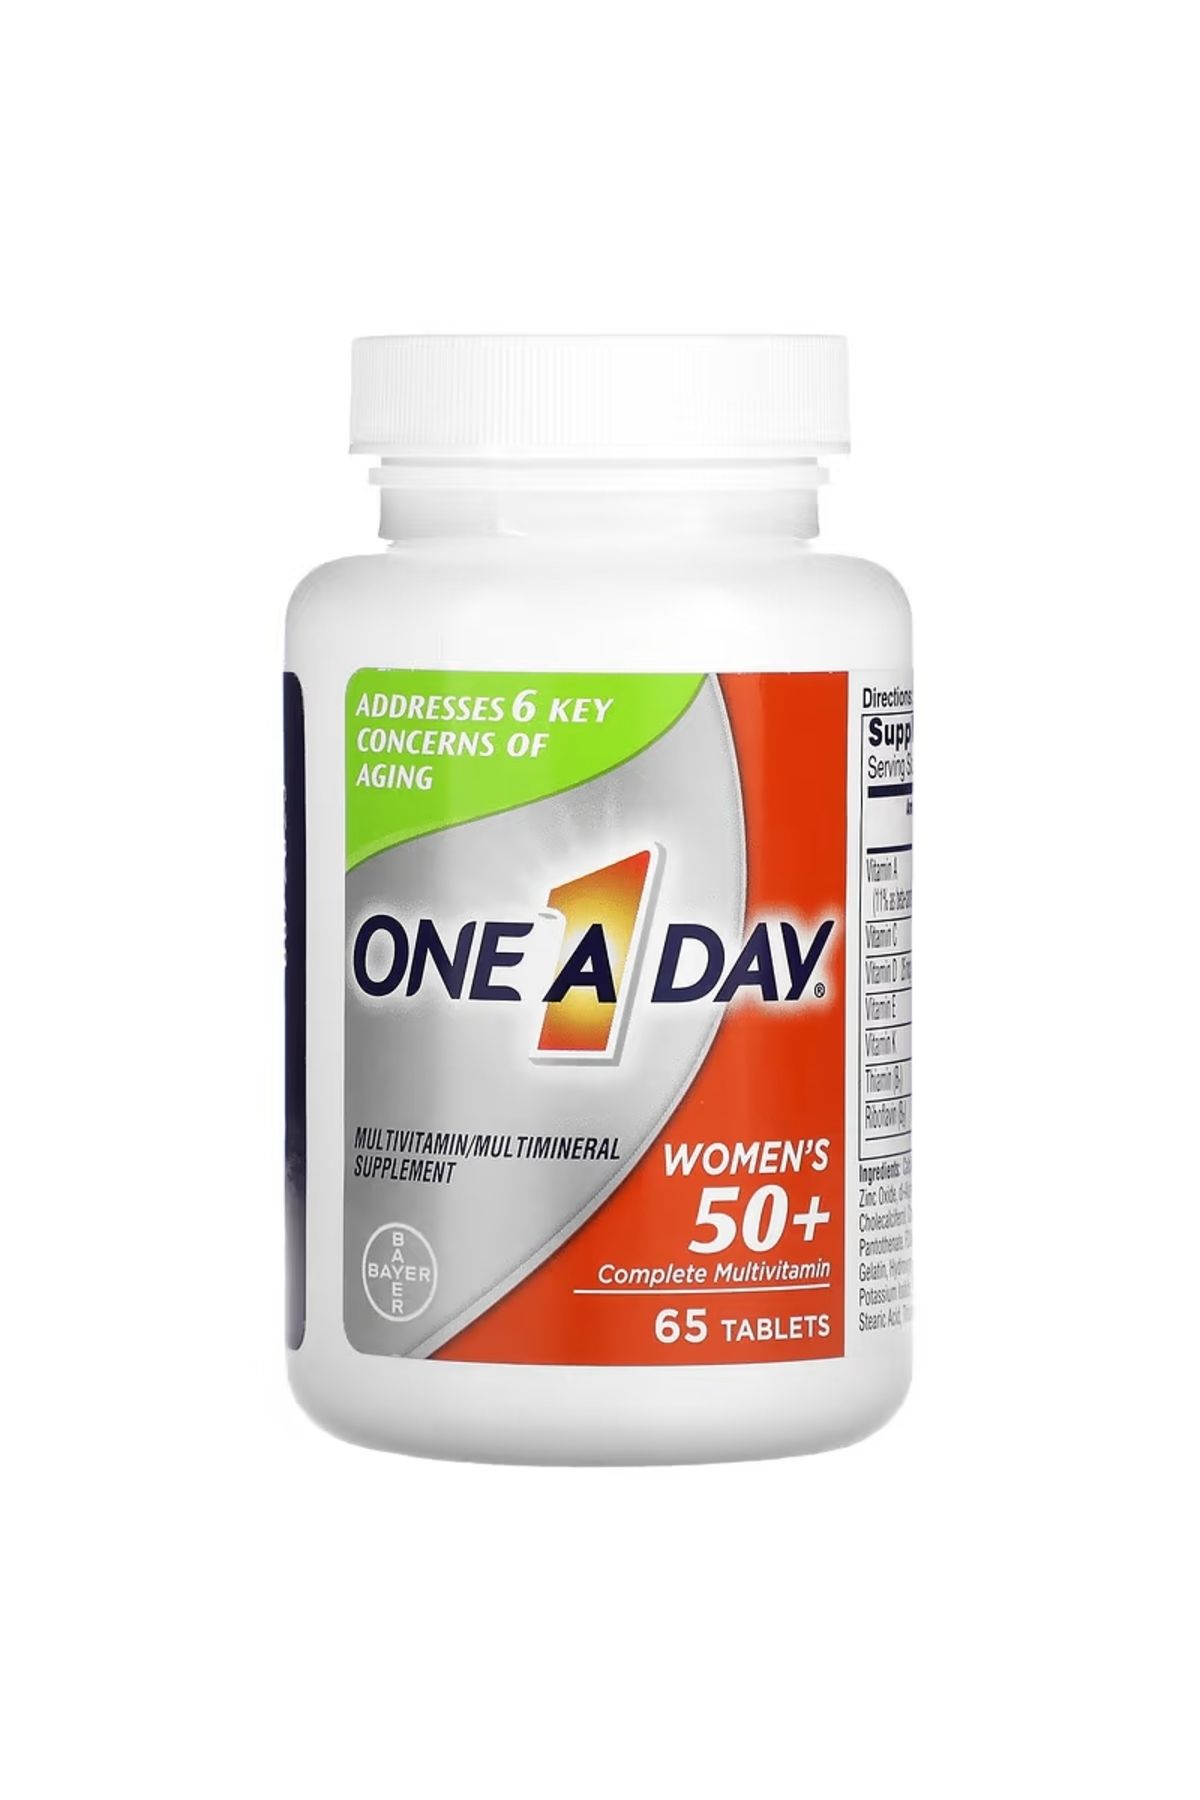 Bayer One A Day Women’s 50+ Complete Multivitamin 65 Tablets